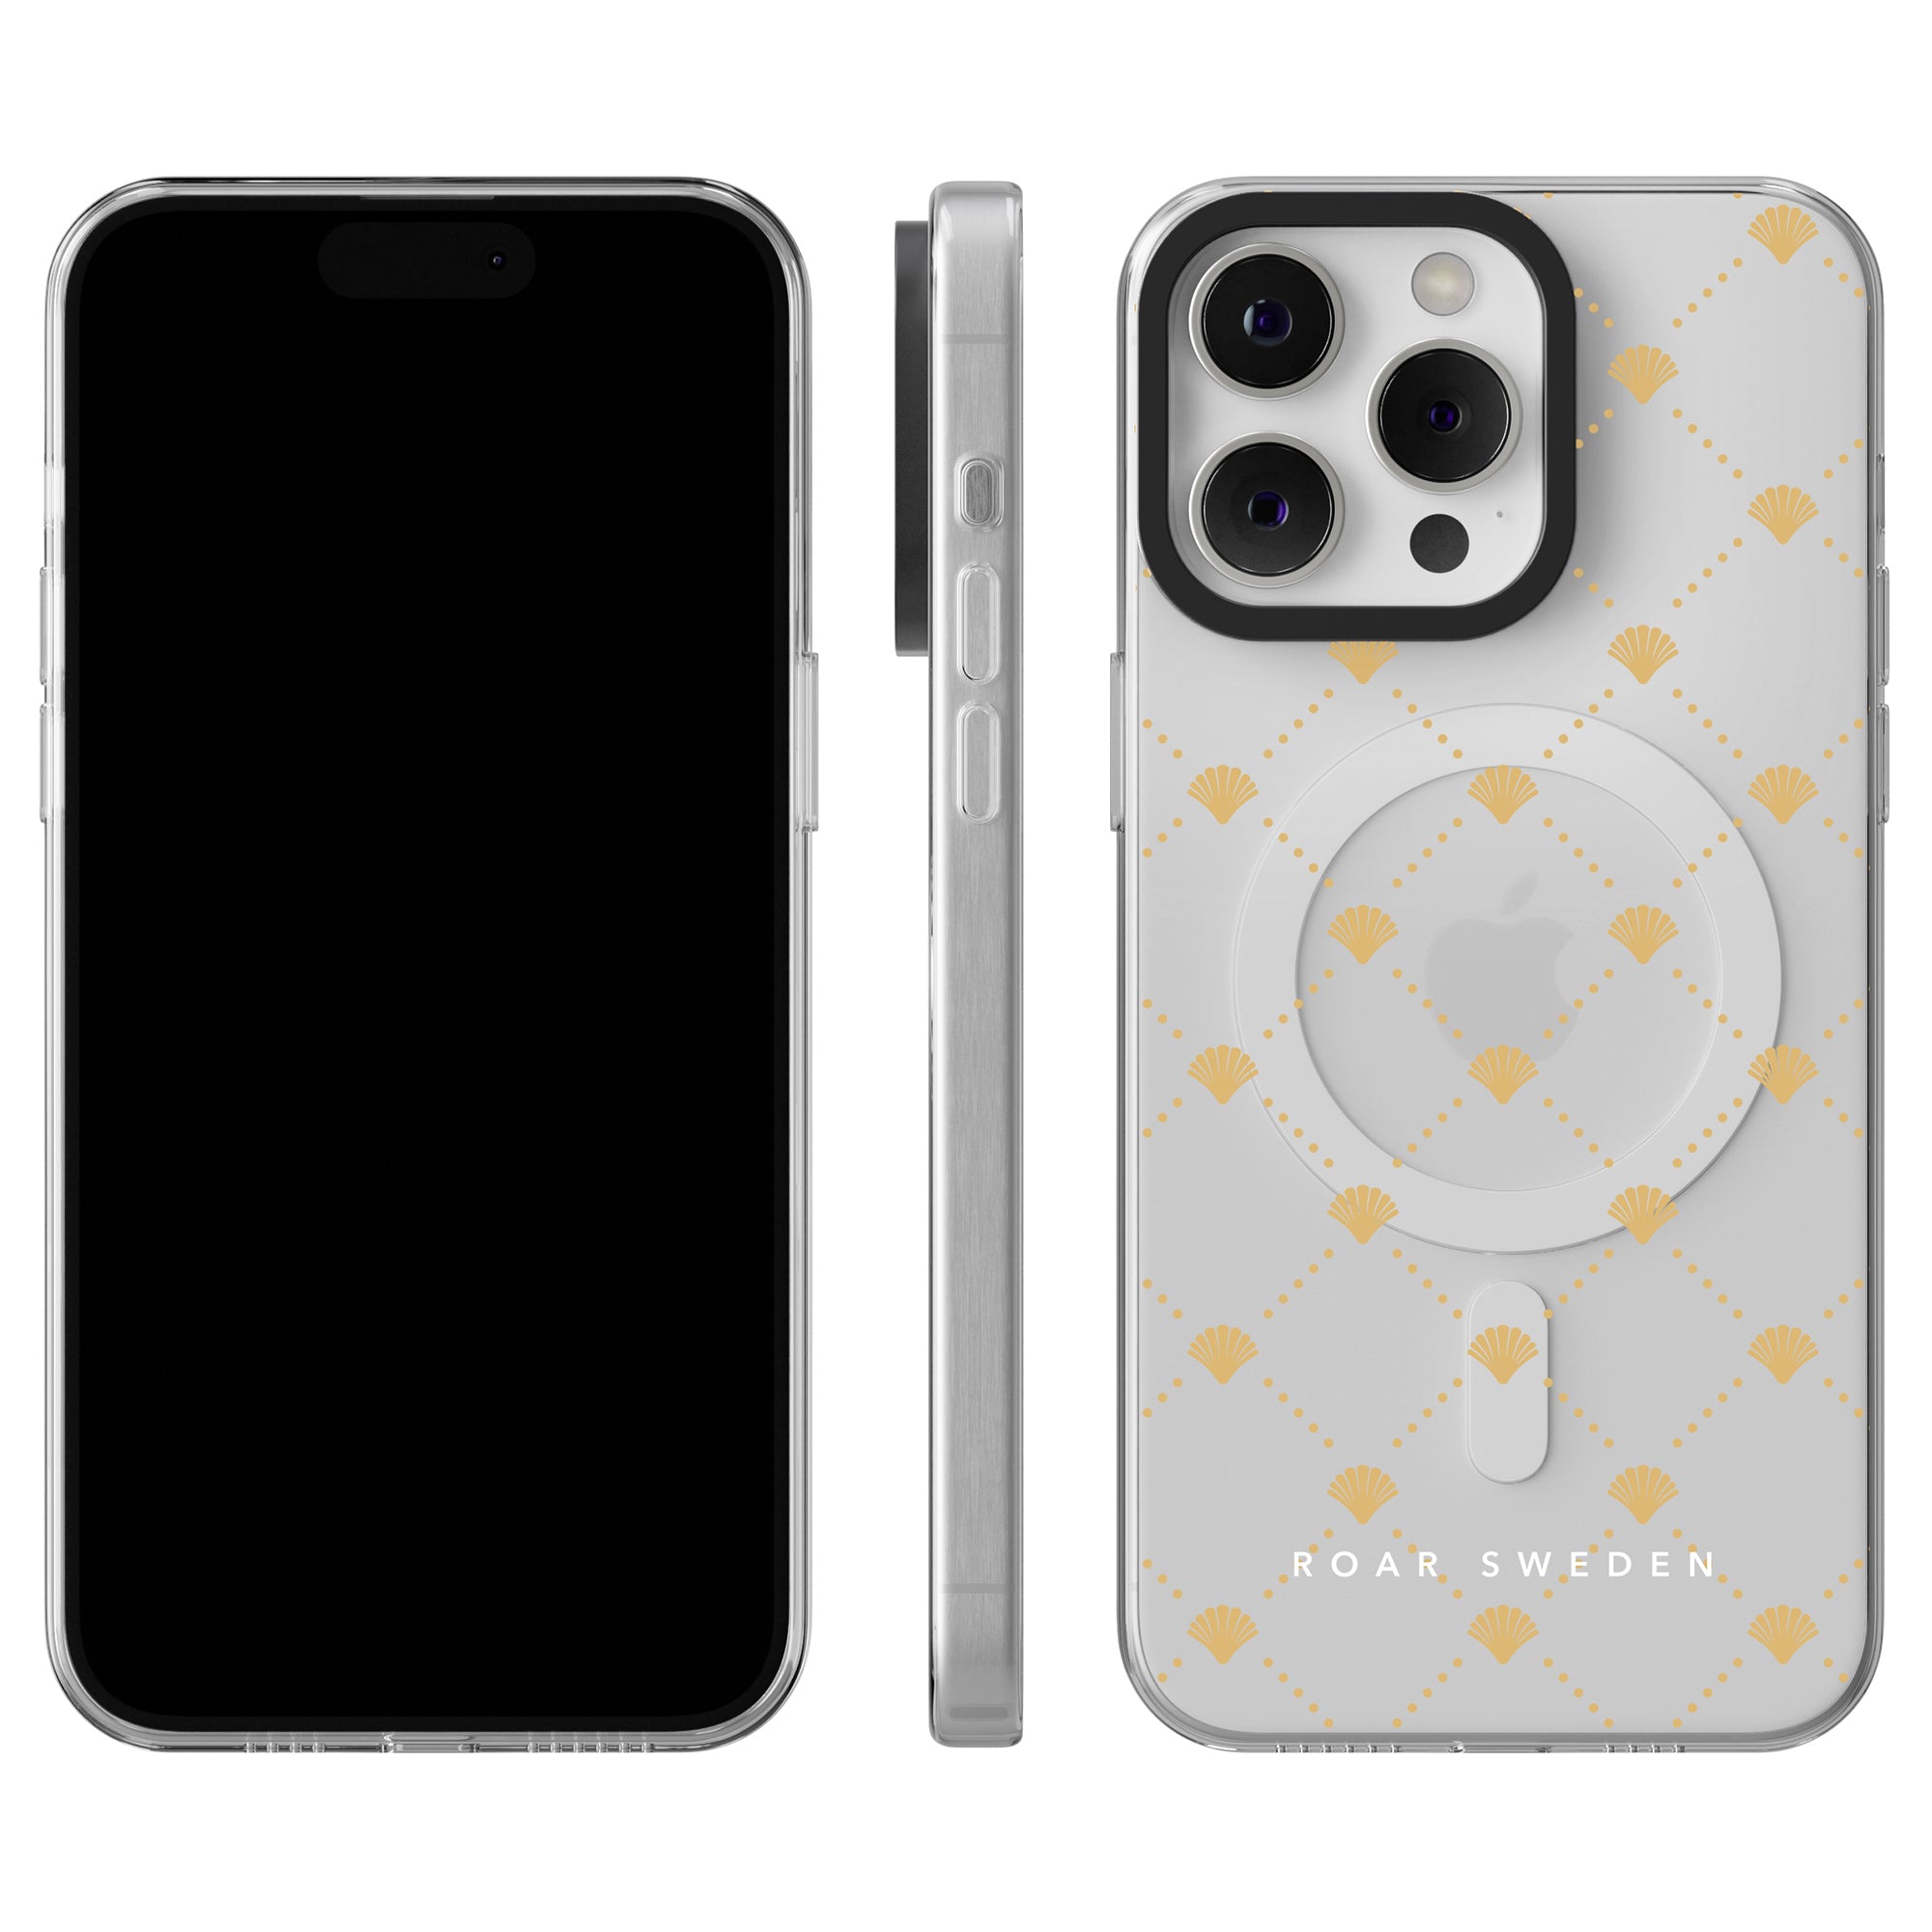 A clear Luxe Shells - MagSafe phone case with a gold pattern and the text "ROAR SWEDEN" displayed on an iPhone. The image shows front, side, and back views of the MagSafe Case.